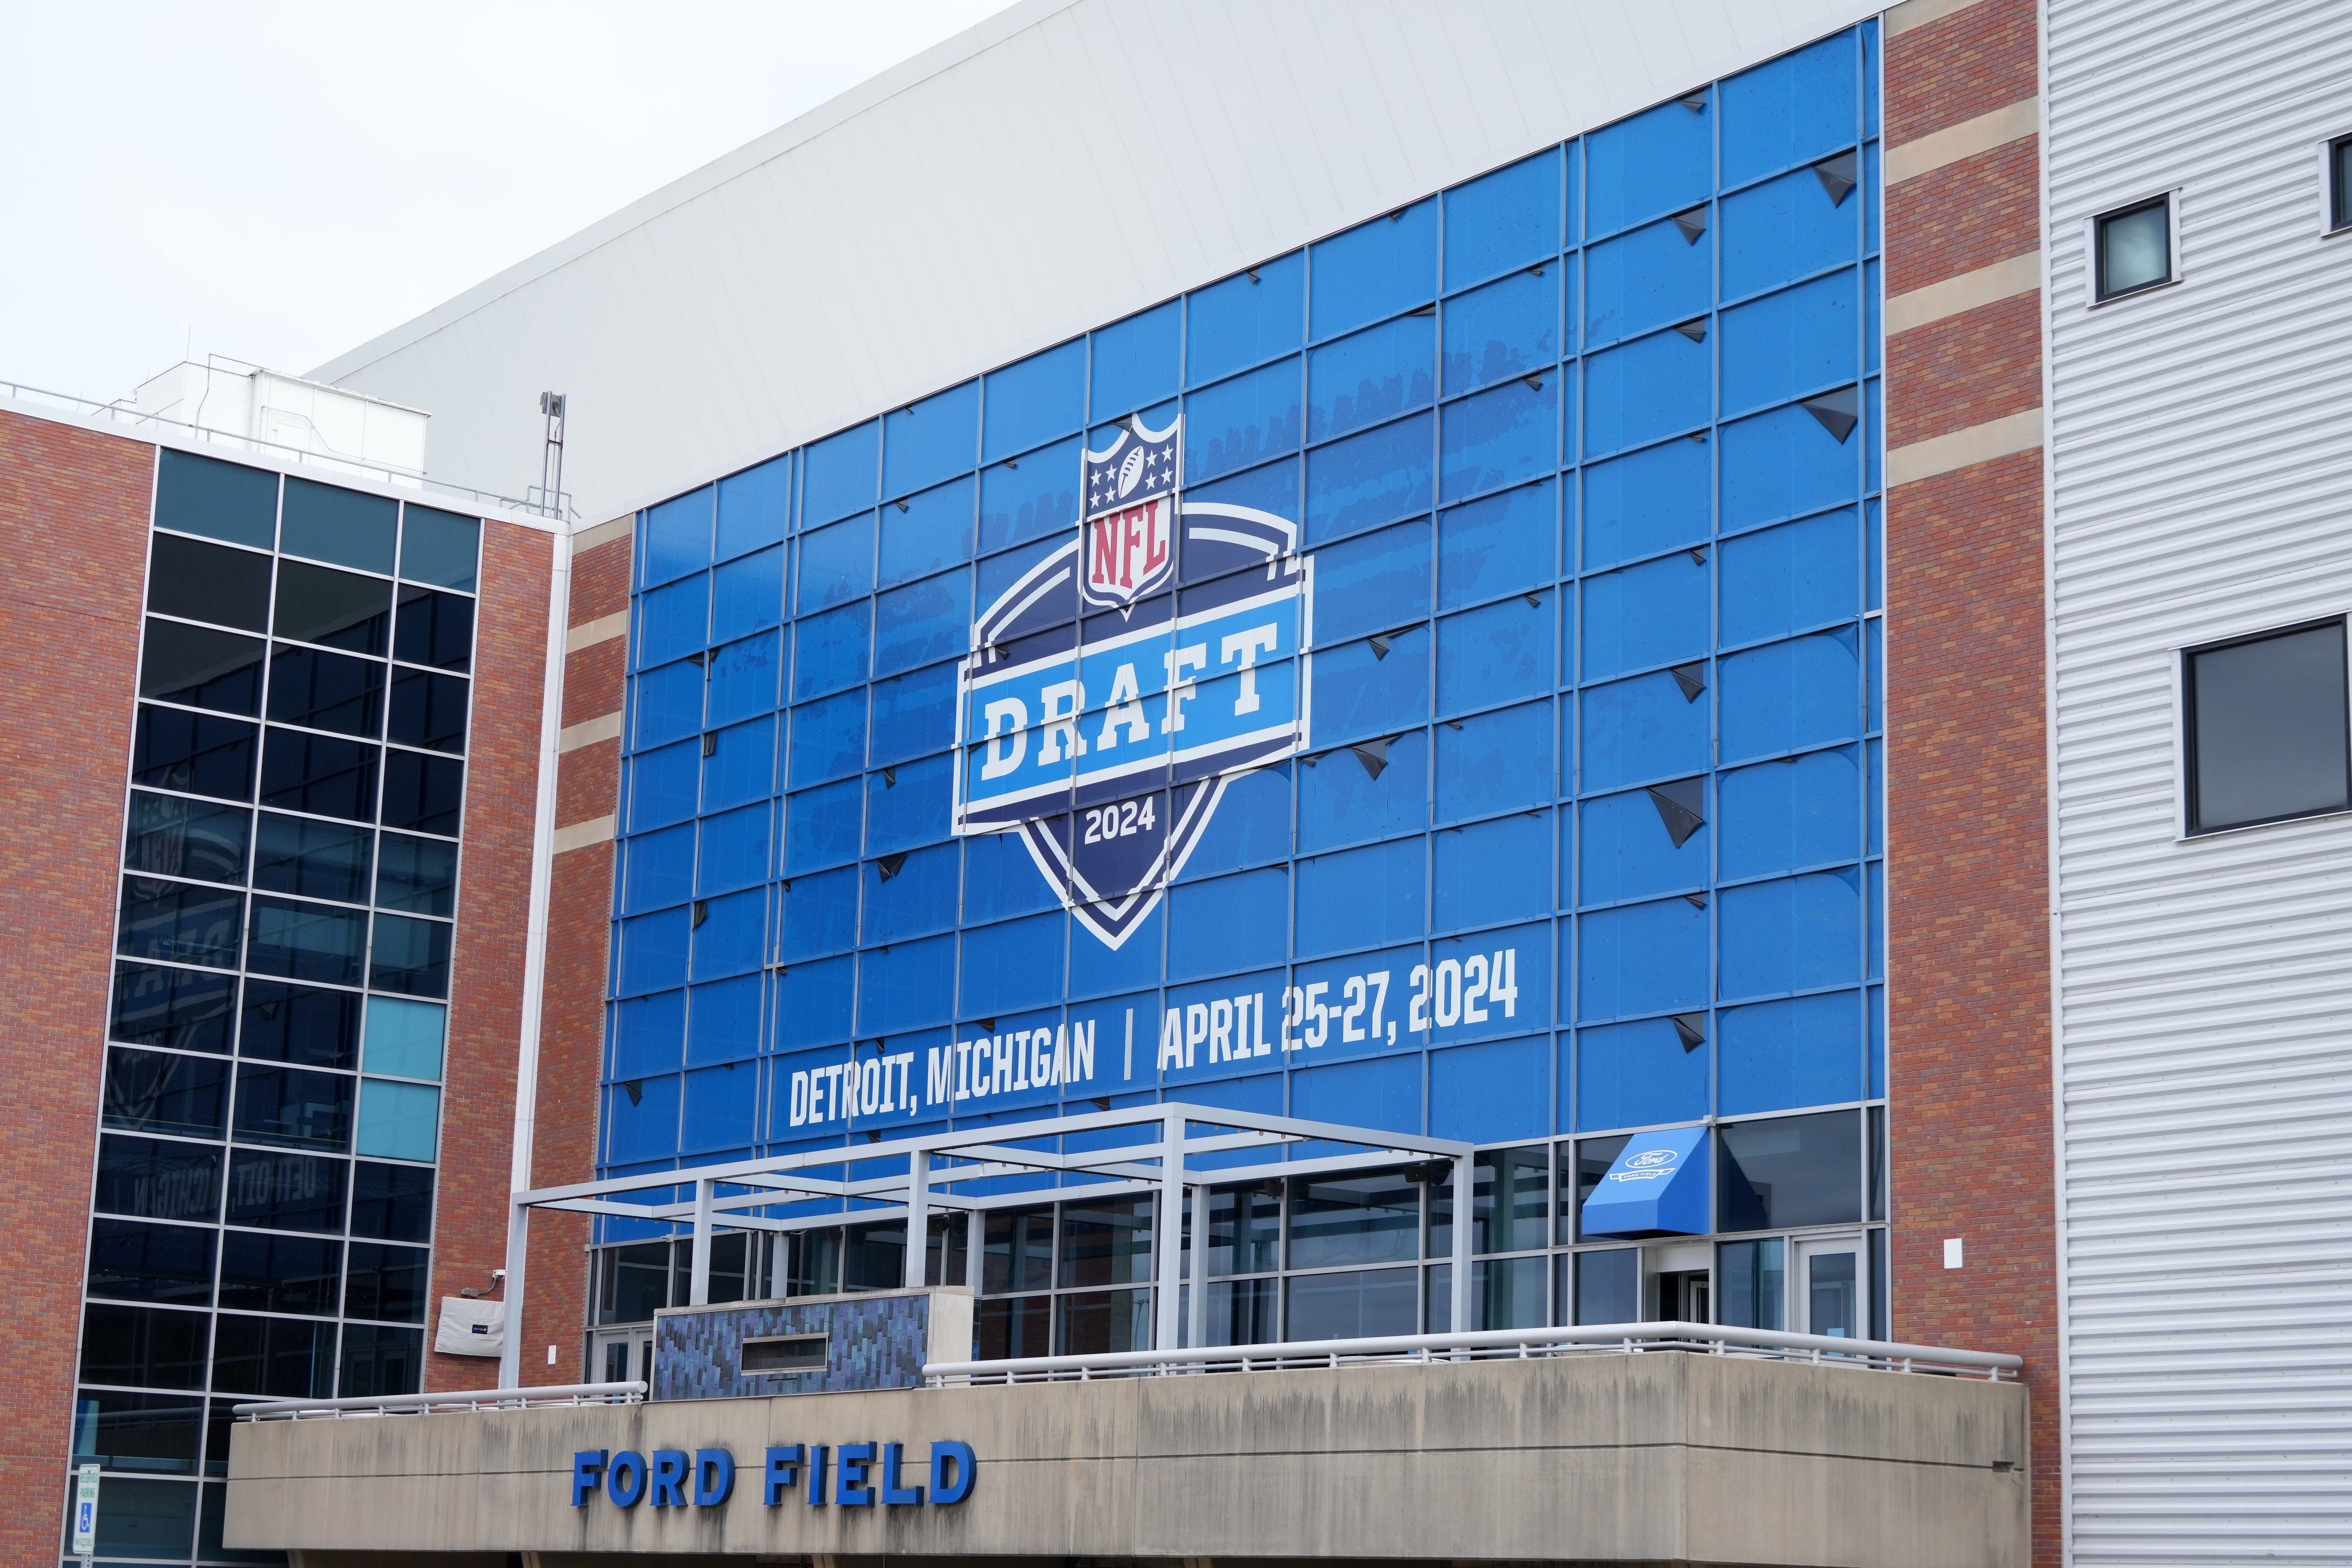 Detroit to hand off NFL draft to Green Bay next week; event includes bicycles and a countdown clock